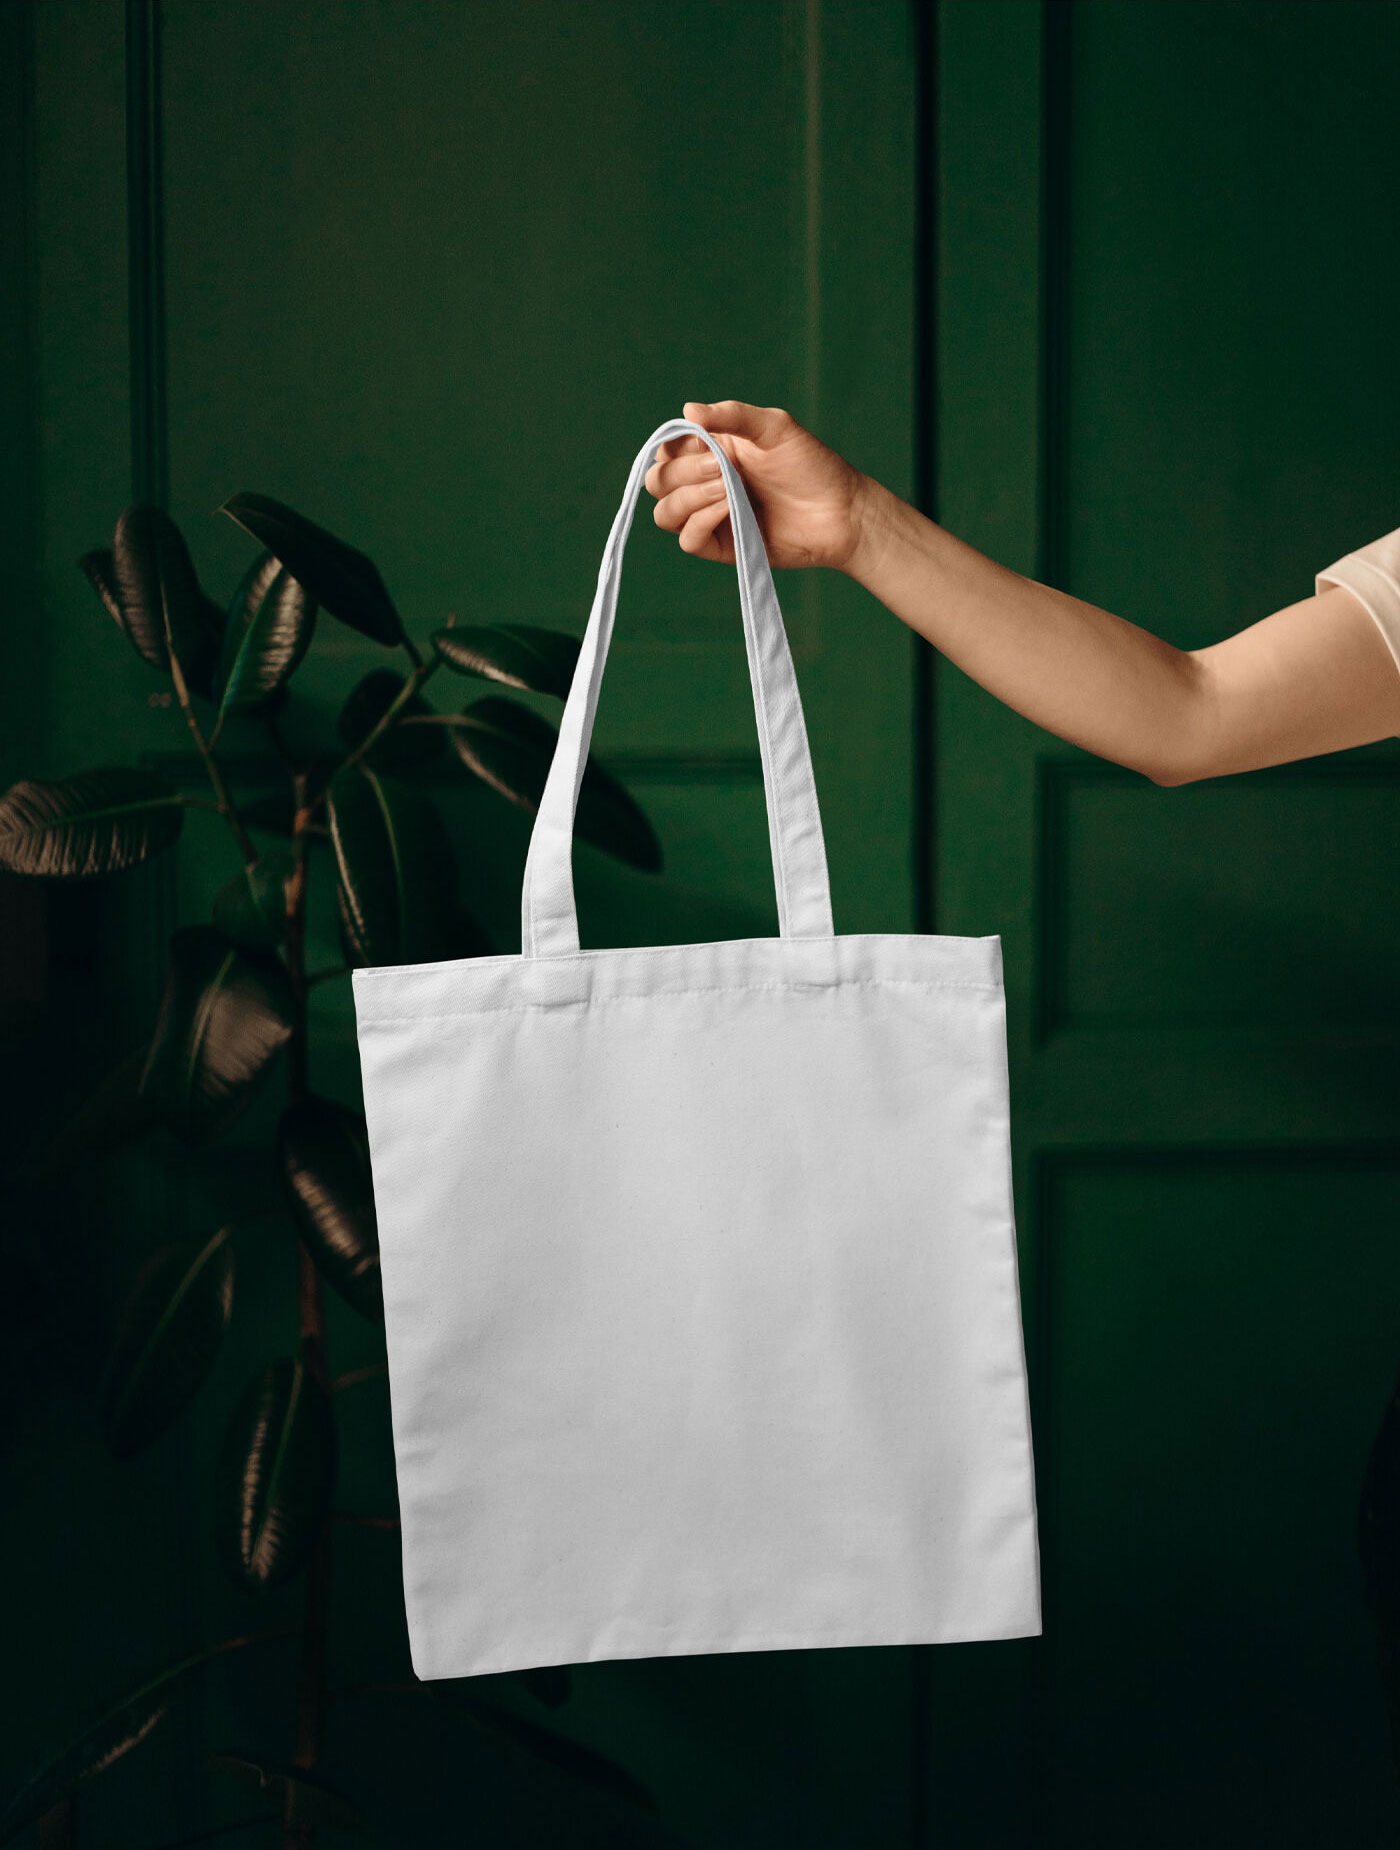 Front View Holding Up Canvas Bag in Leaving Room Mockup FREE PSD